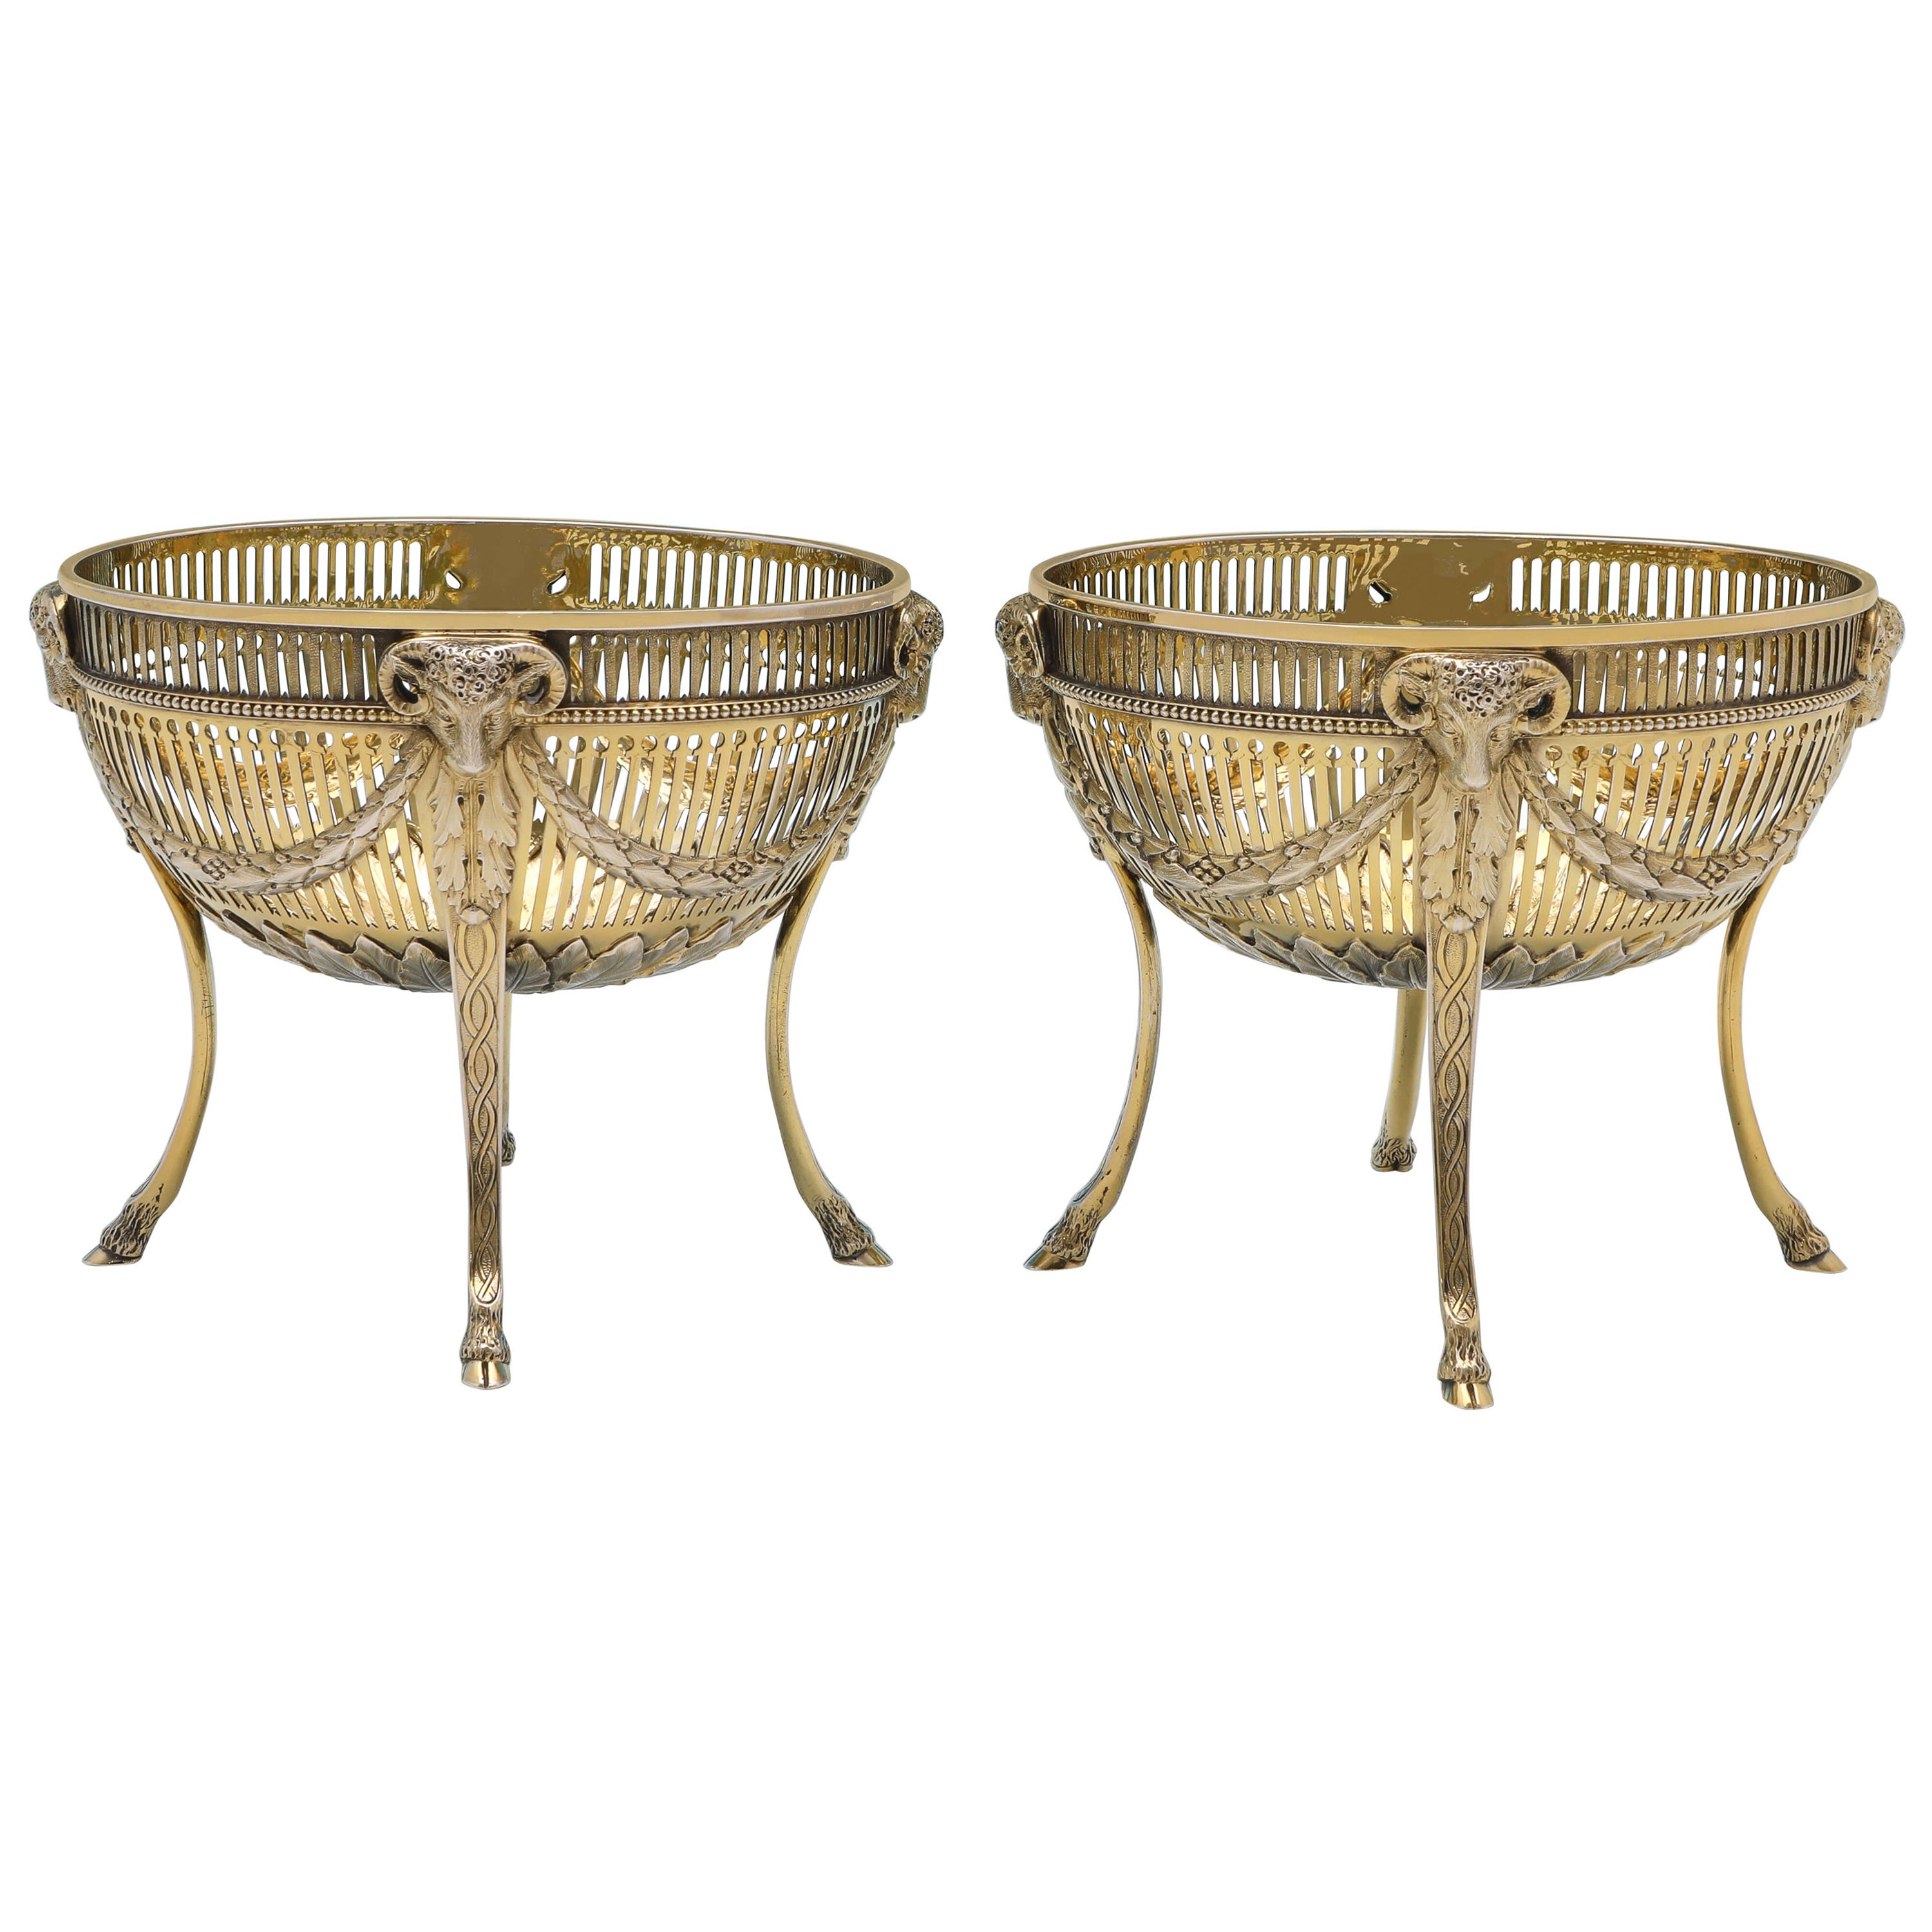 Victorian Neoclassical Revival Pair of Gilt Sterling Silver Dishes, London 1880 For Sale